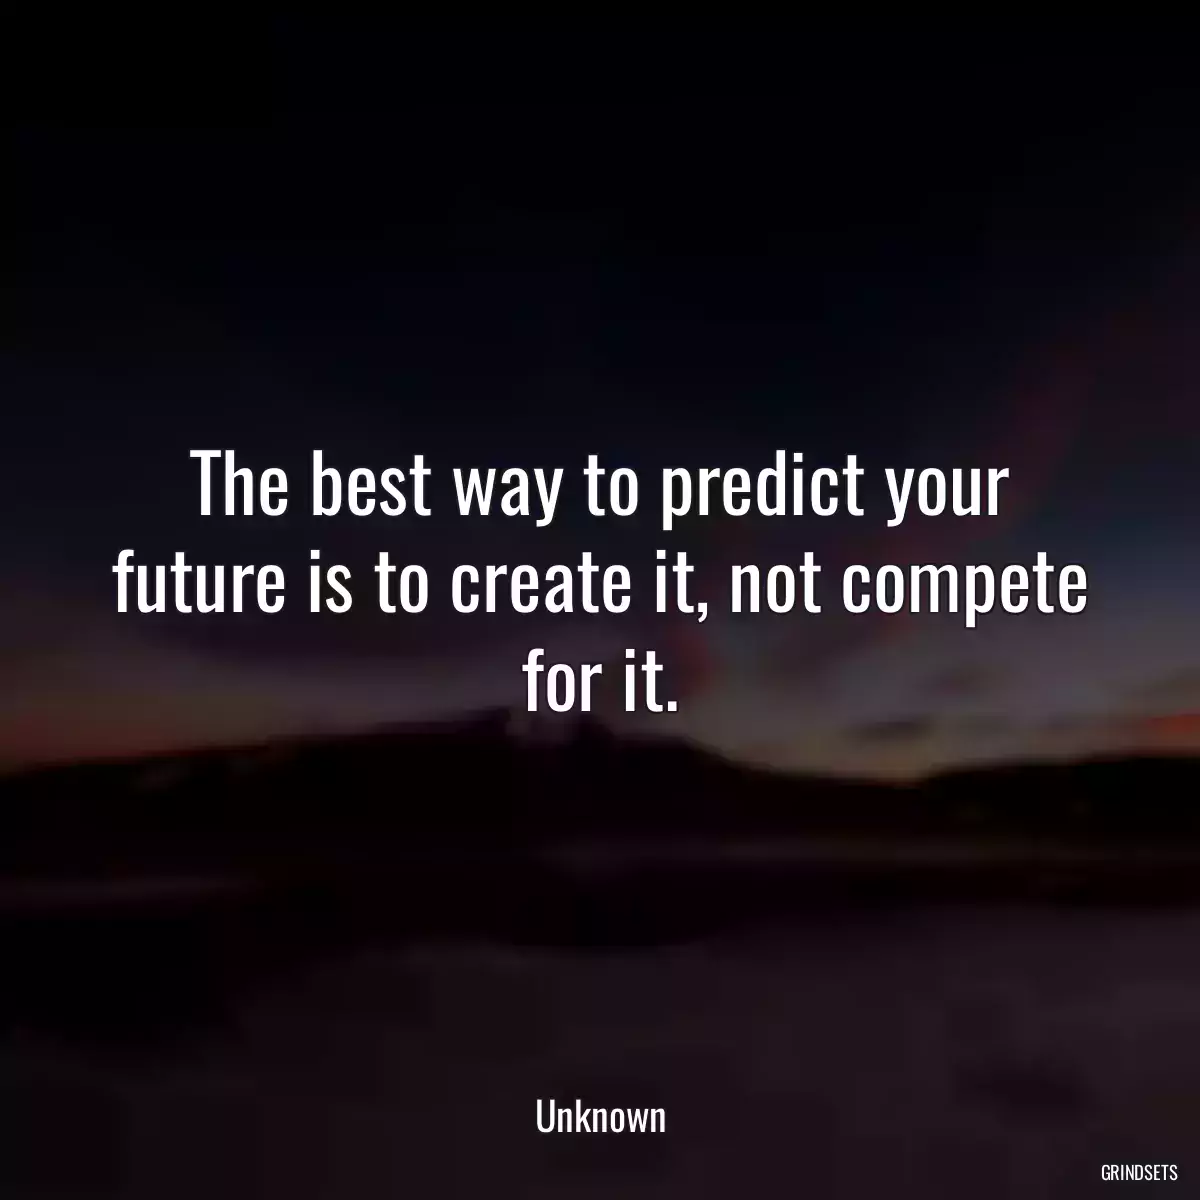 The best way to predict your future is to create it, not compete for it.